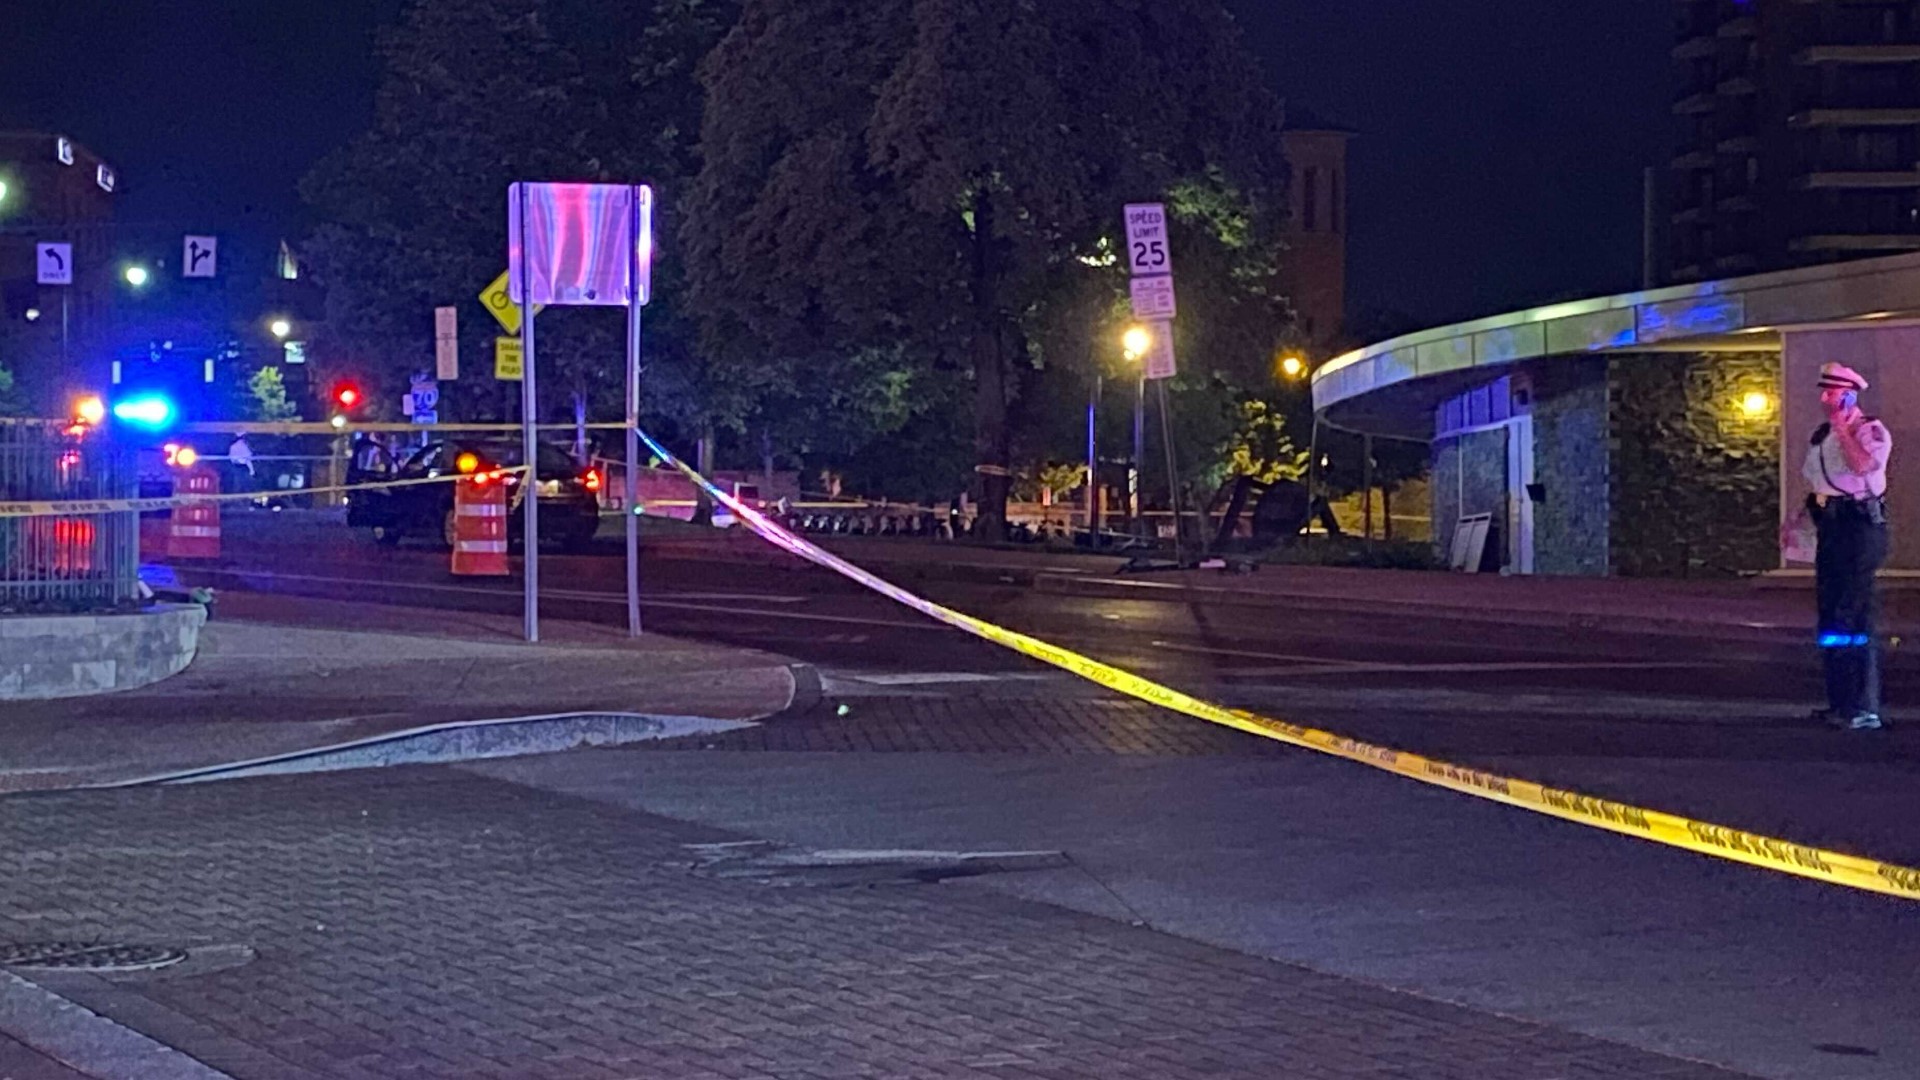 A 16-year-old girl was killed and five people, all under 20 years old, were hurt in a shooting that happened at Bicentennial Park in downtown Columbus.